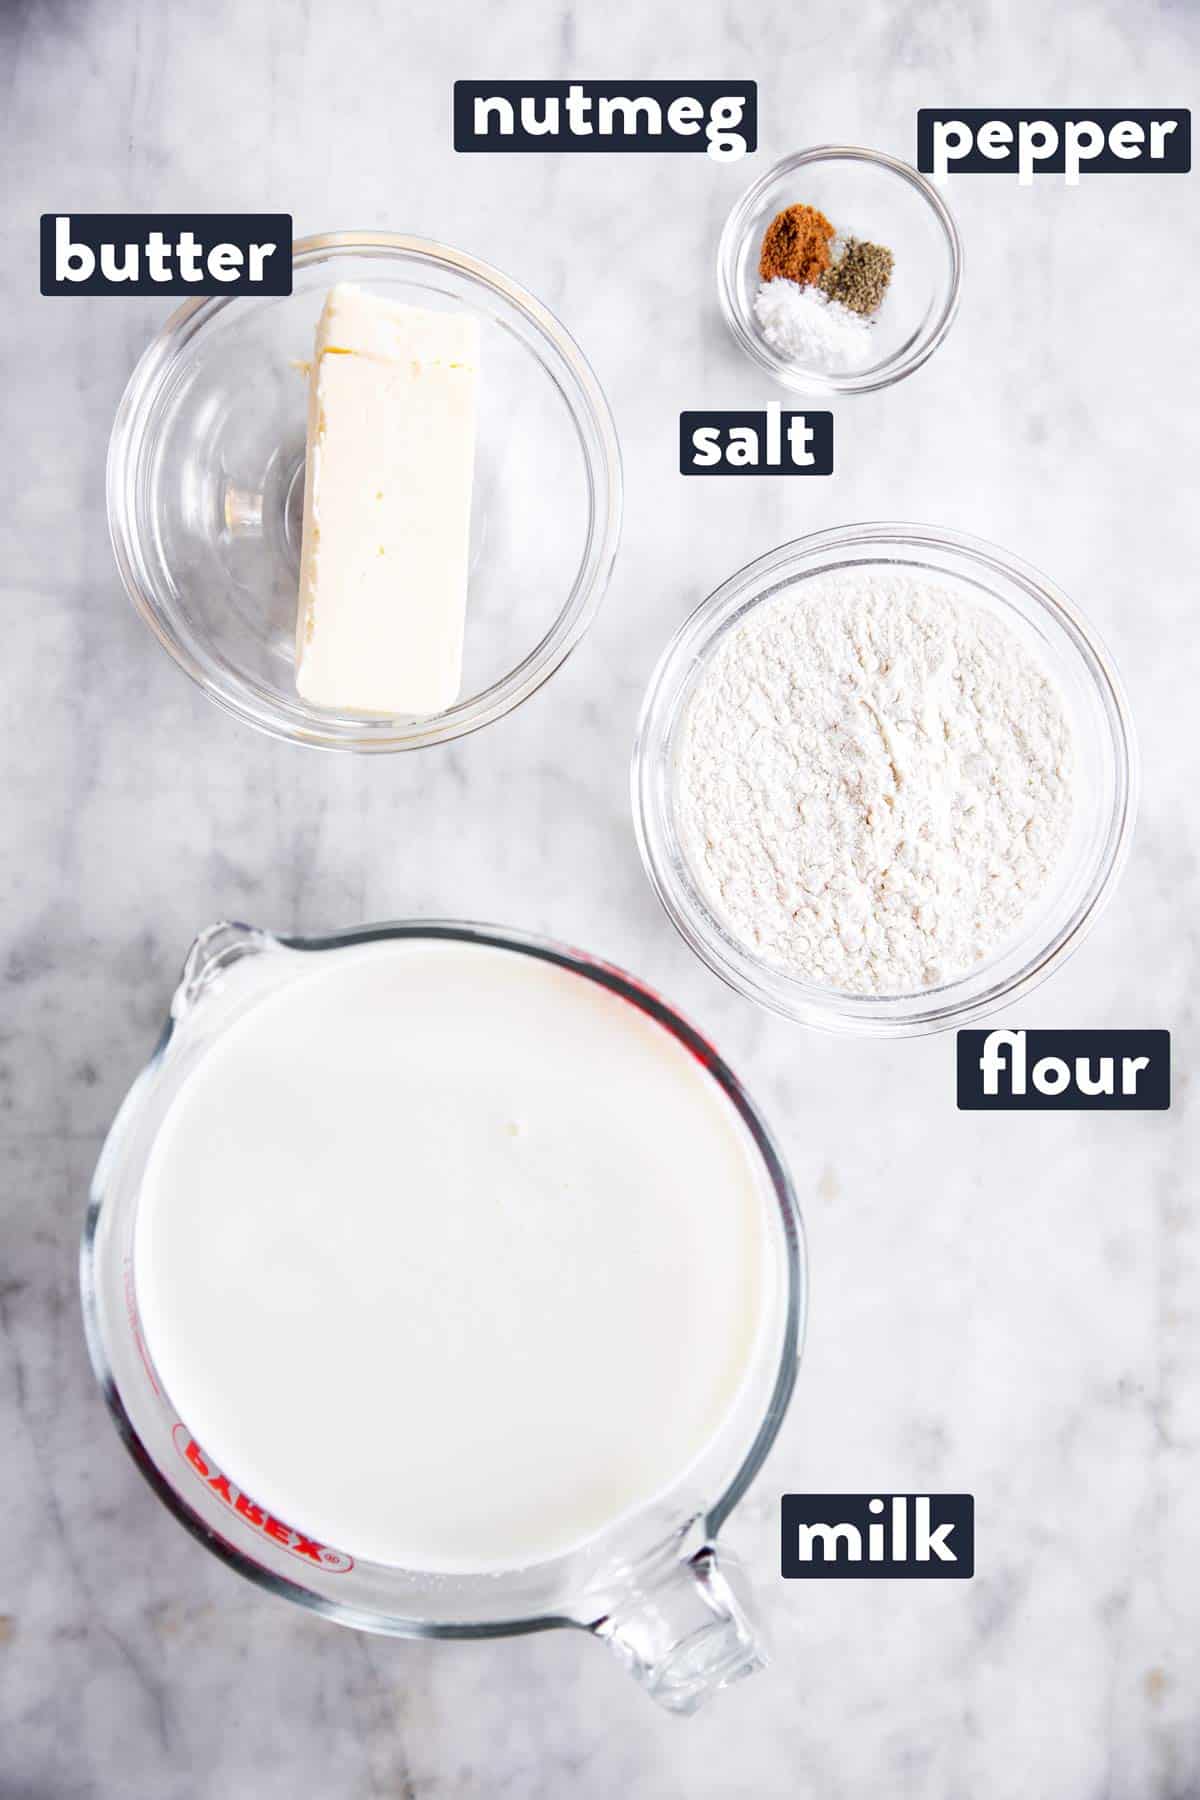 ingredients for bechamel sauce with text labels